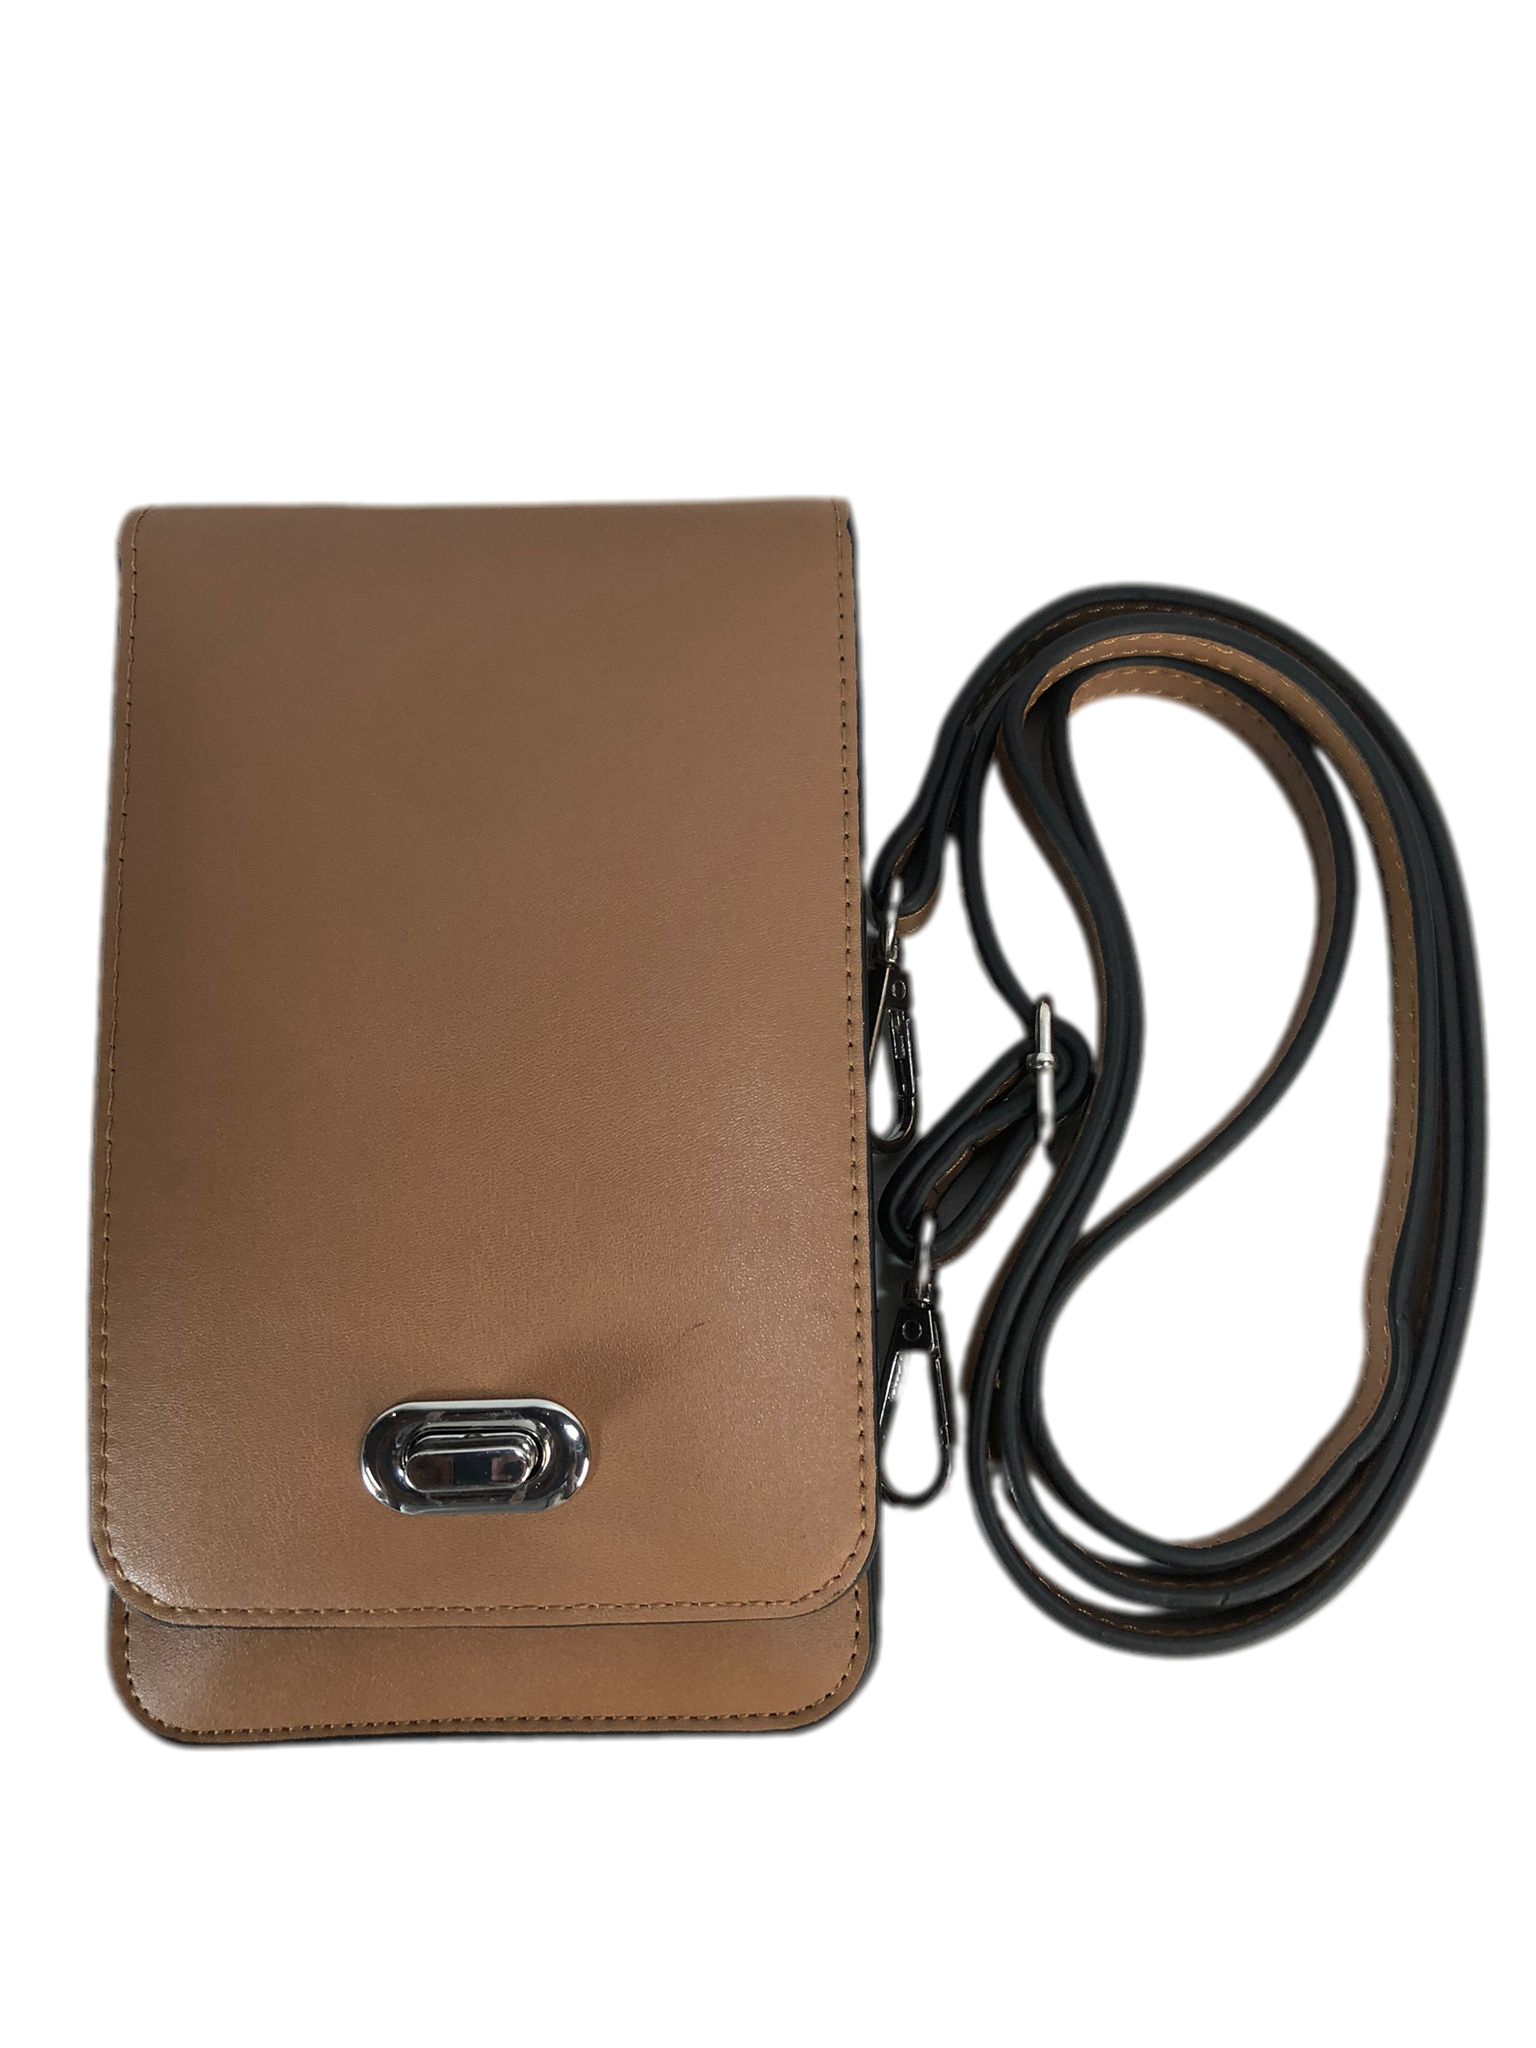 Save the Girls Touchscreen Phone Crossbody with RFID